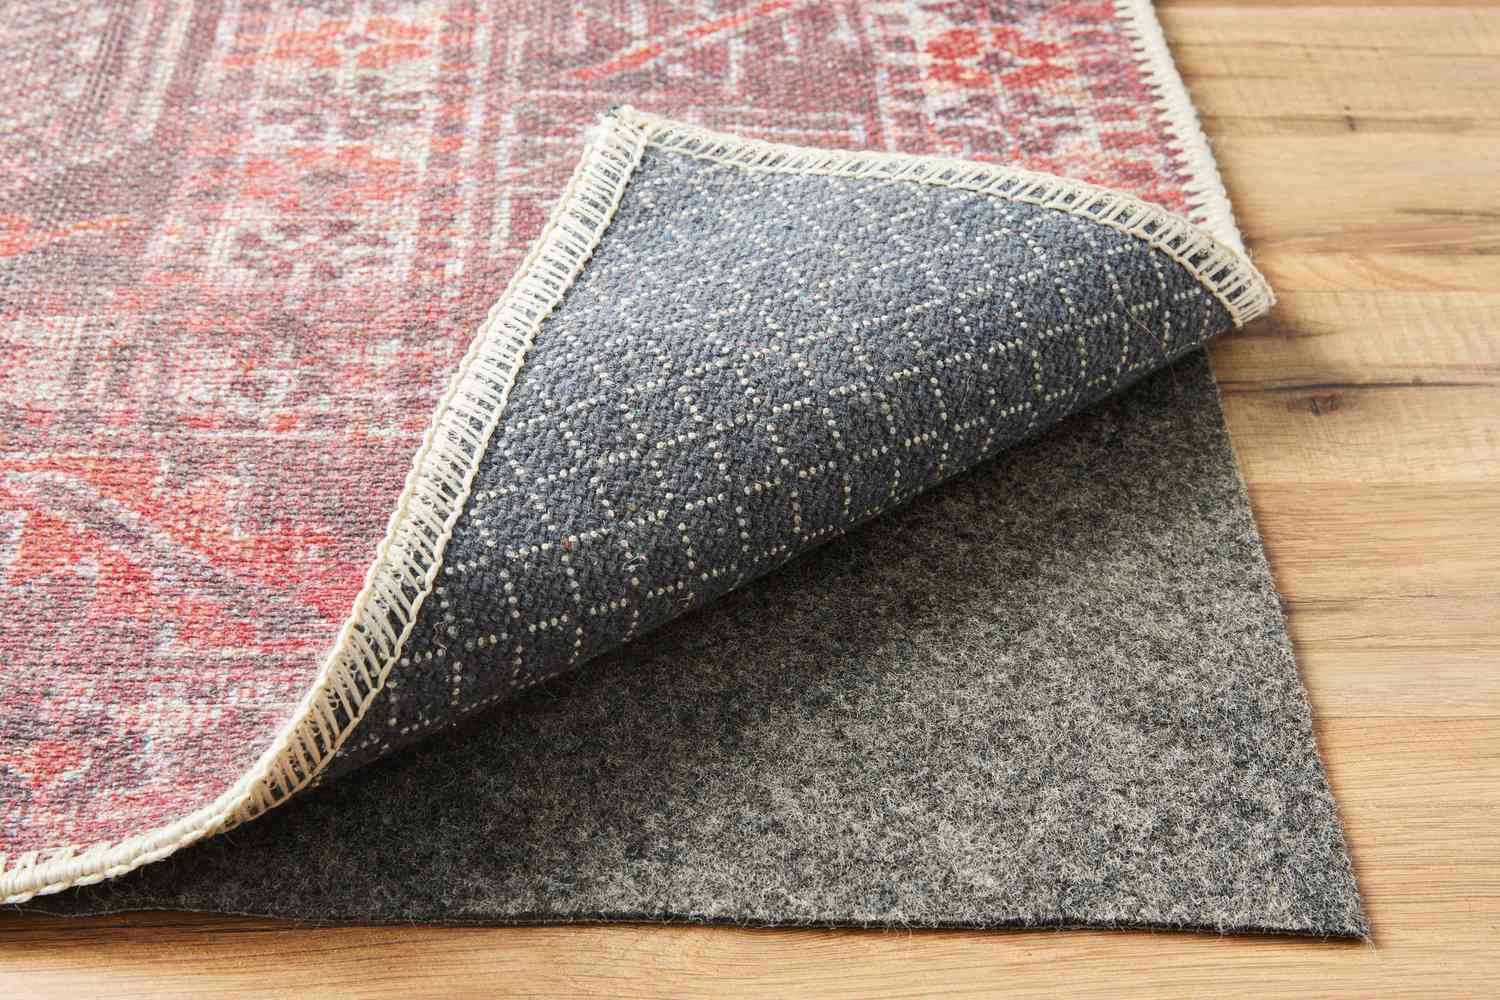 How To Stop My Rug From Sliding